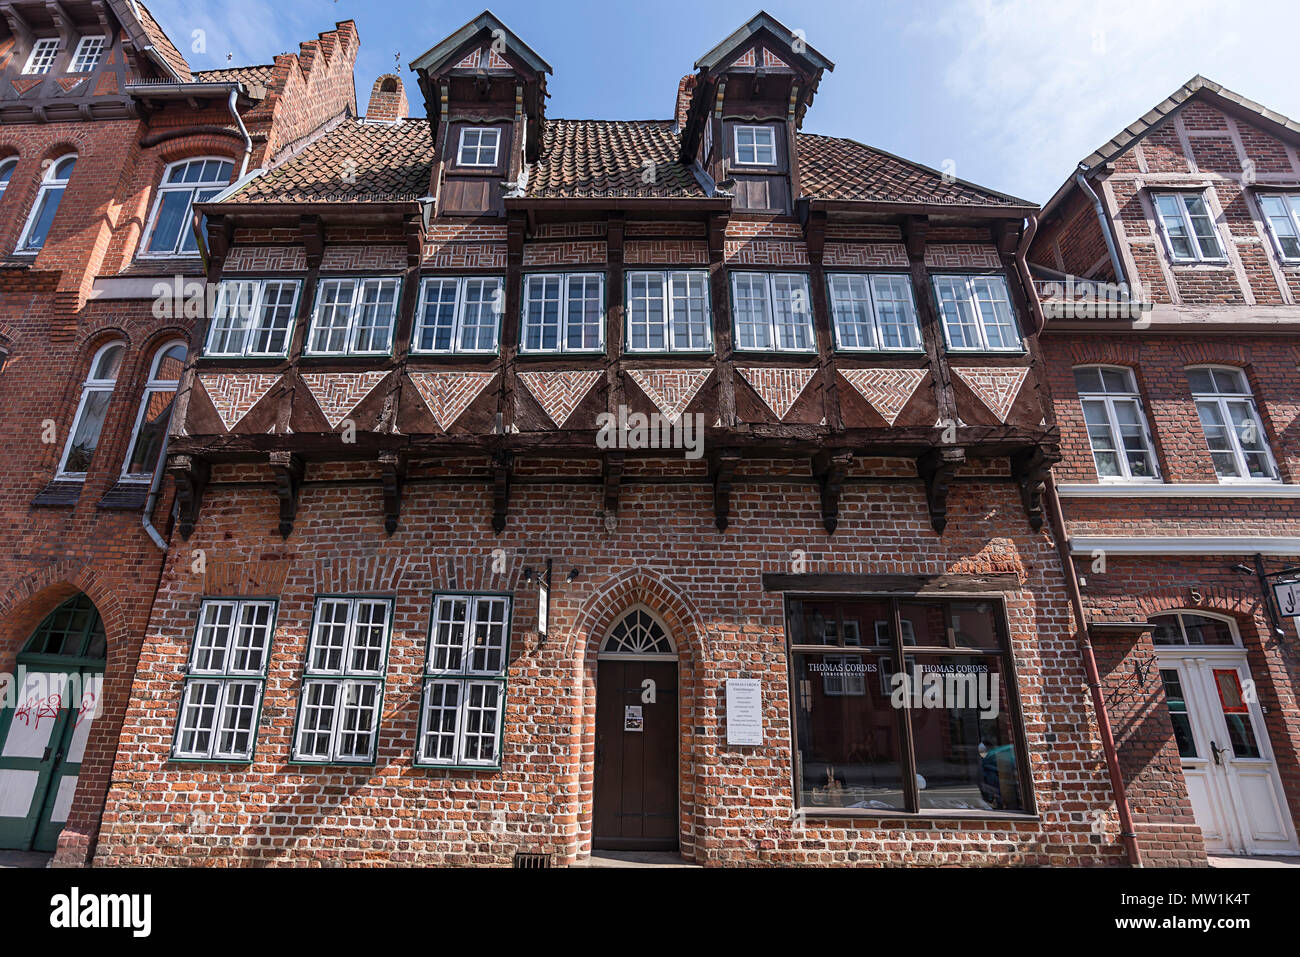 Historical house, brick architecture, old town, Lüneburg, Lower Saxony, Germany Stock Photo